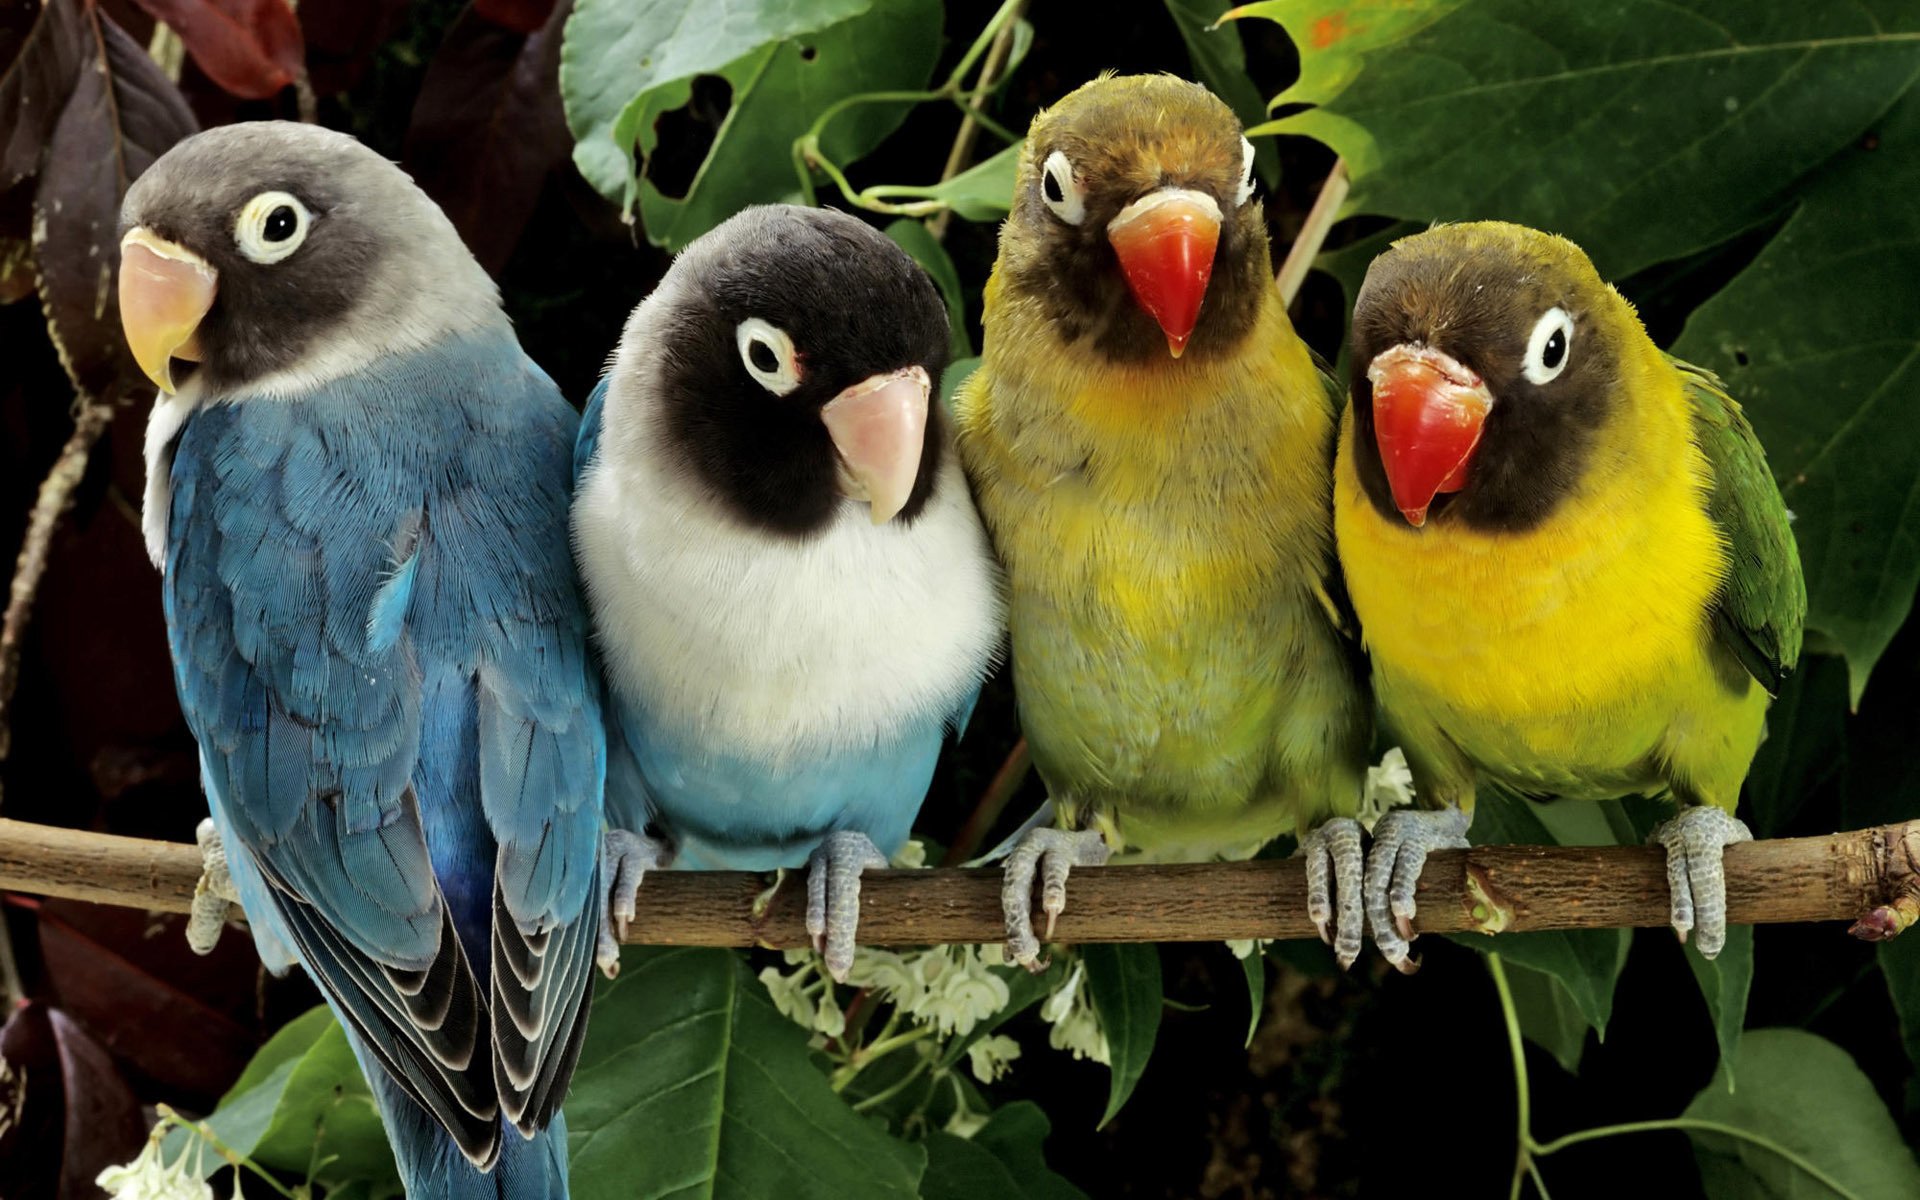 Lovebirds of different colors sitting together on a twig